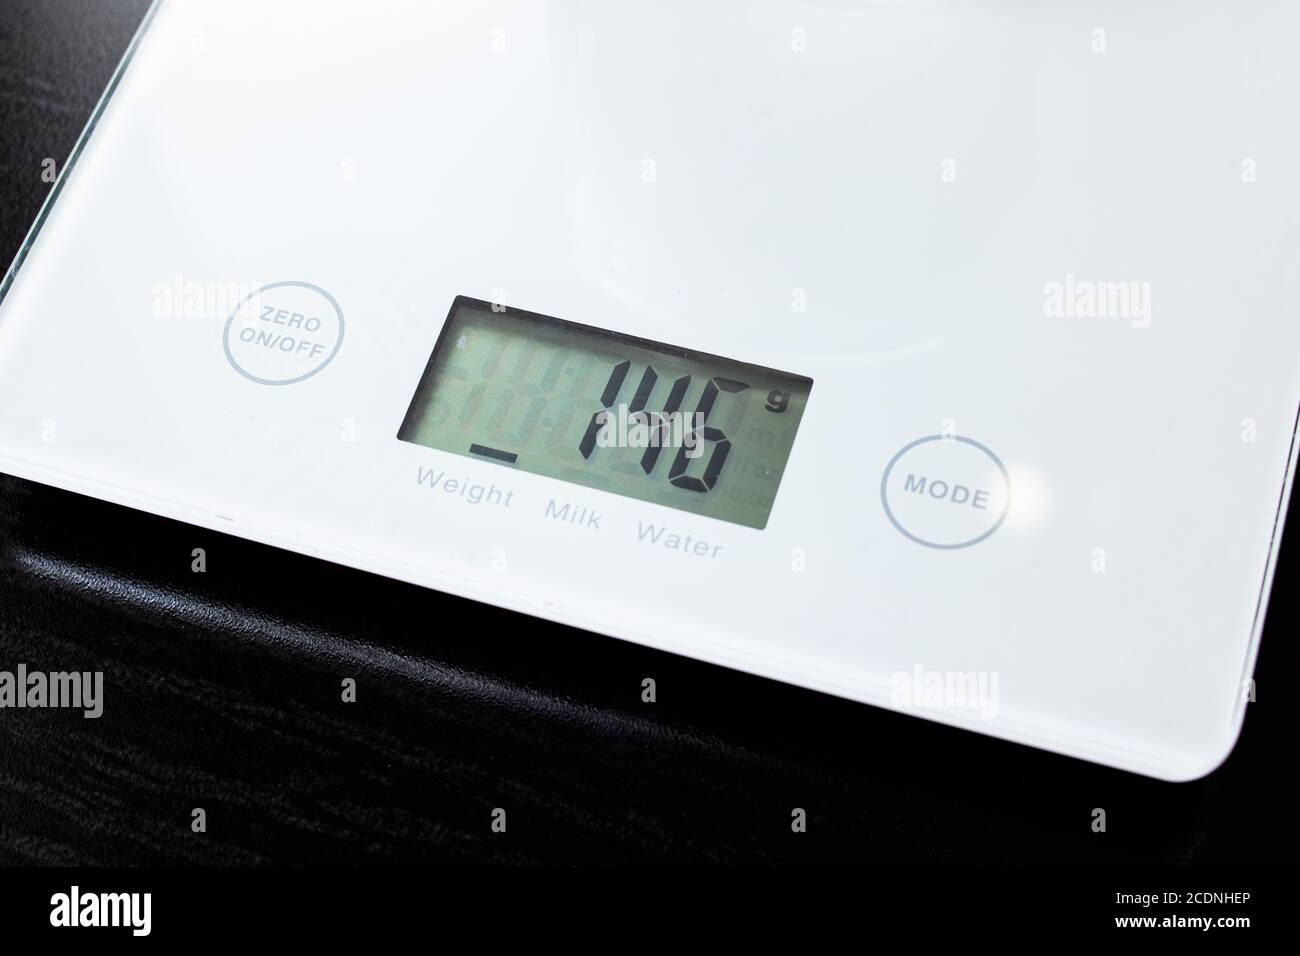 Indicator in grams on electronic scales closeup Stock Photo